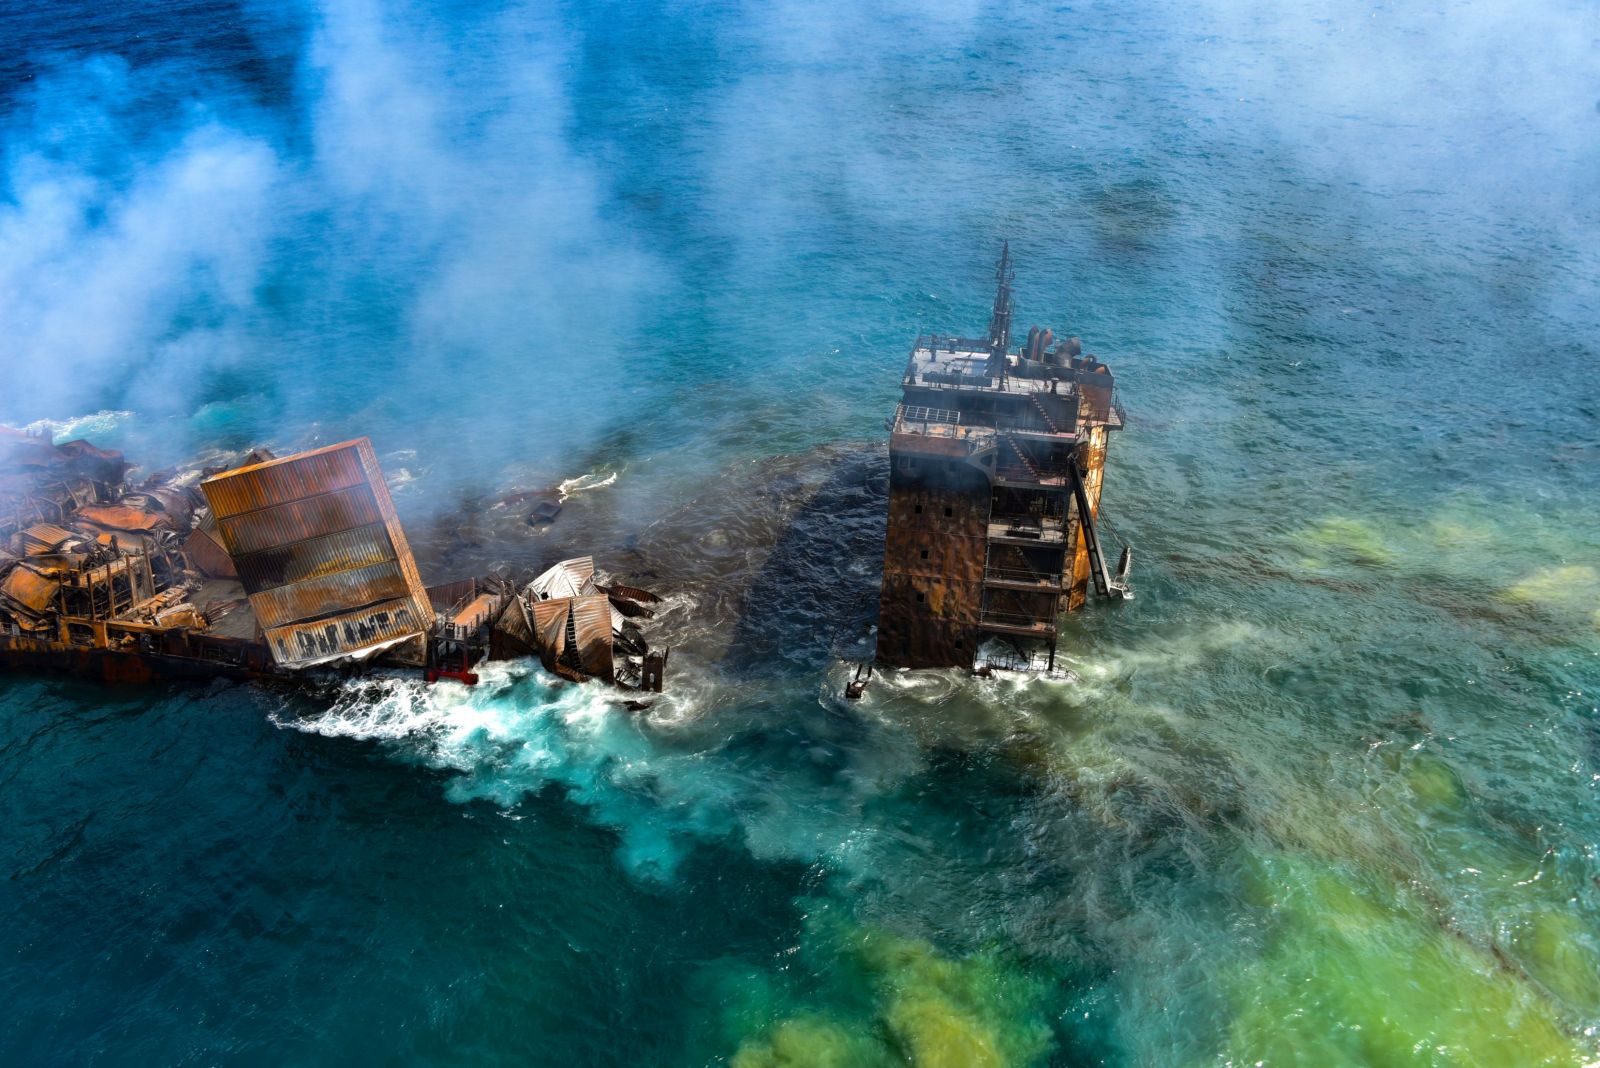 epa09243157 A handout photo made available by the Sri Lankan Air force Media shows the fire gutted and crippled Singapore-registered container cargo vessel, MV X-Press Pearl, on the 9 nautical miles northwest of Colombo port in Colombo, Sri Lanka, 02 June 2021. The fire on the Singaporean flagged container cargo vessel MV X-Press Pearl, which had been burning for over 13 days, was doused and the salvage company began towing it towards deeper seas off the coast of Colombo on 02 June. However, latest reports by the Sri Lanka Navy stated that the towing operation had been halted as the stern of the ship was striking the seabed. They also reported that so far no oil spills have been observed. A huge amount of plastic granules and debris has already washed ashore on beaches from Colombo to Negombo and authorities now fear another wave of massive pollution should the 278 tonnes of bunker oil and 50 tonnes of gas in the Singapore-registered ship's fuel tanks leak into the Indian Ocean.  EPA/SRI LANKAN AIR FORCE MEDIA HANDOUT  HANDOUT EDITORIAL USE ONLY/NO SALES